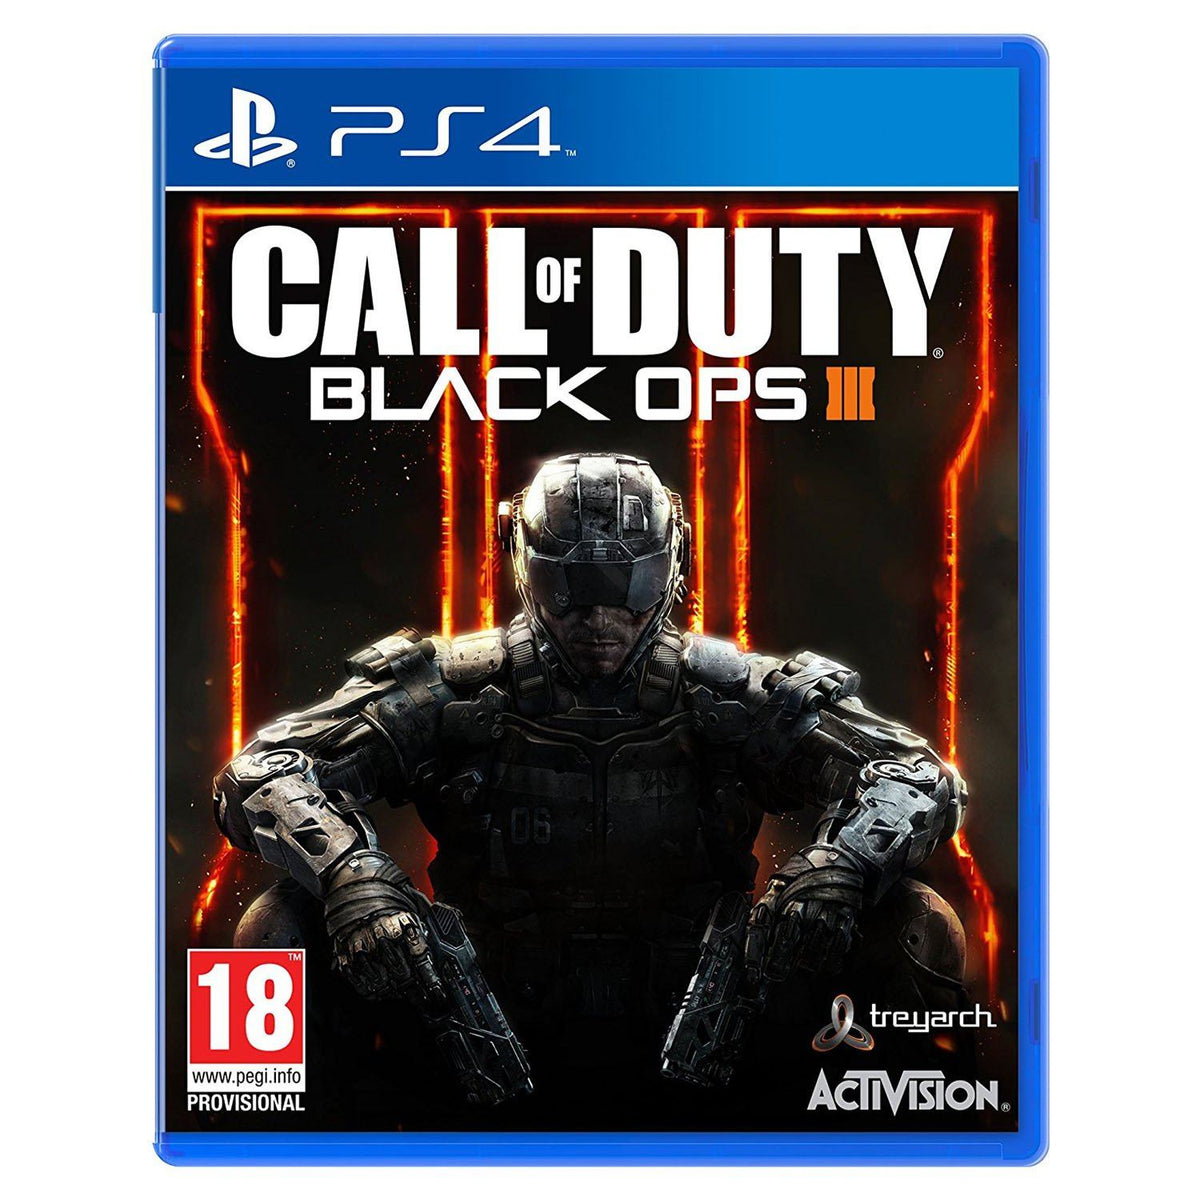 Call of Duty Black Ops III Gold Edition For PlayStation 4 "Region 2" - Level UpACTIVISIONPlaystation Video Games5030917218576